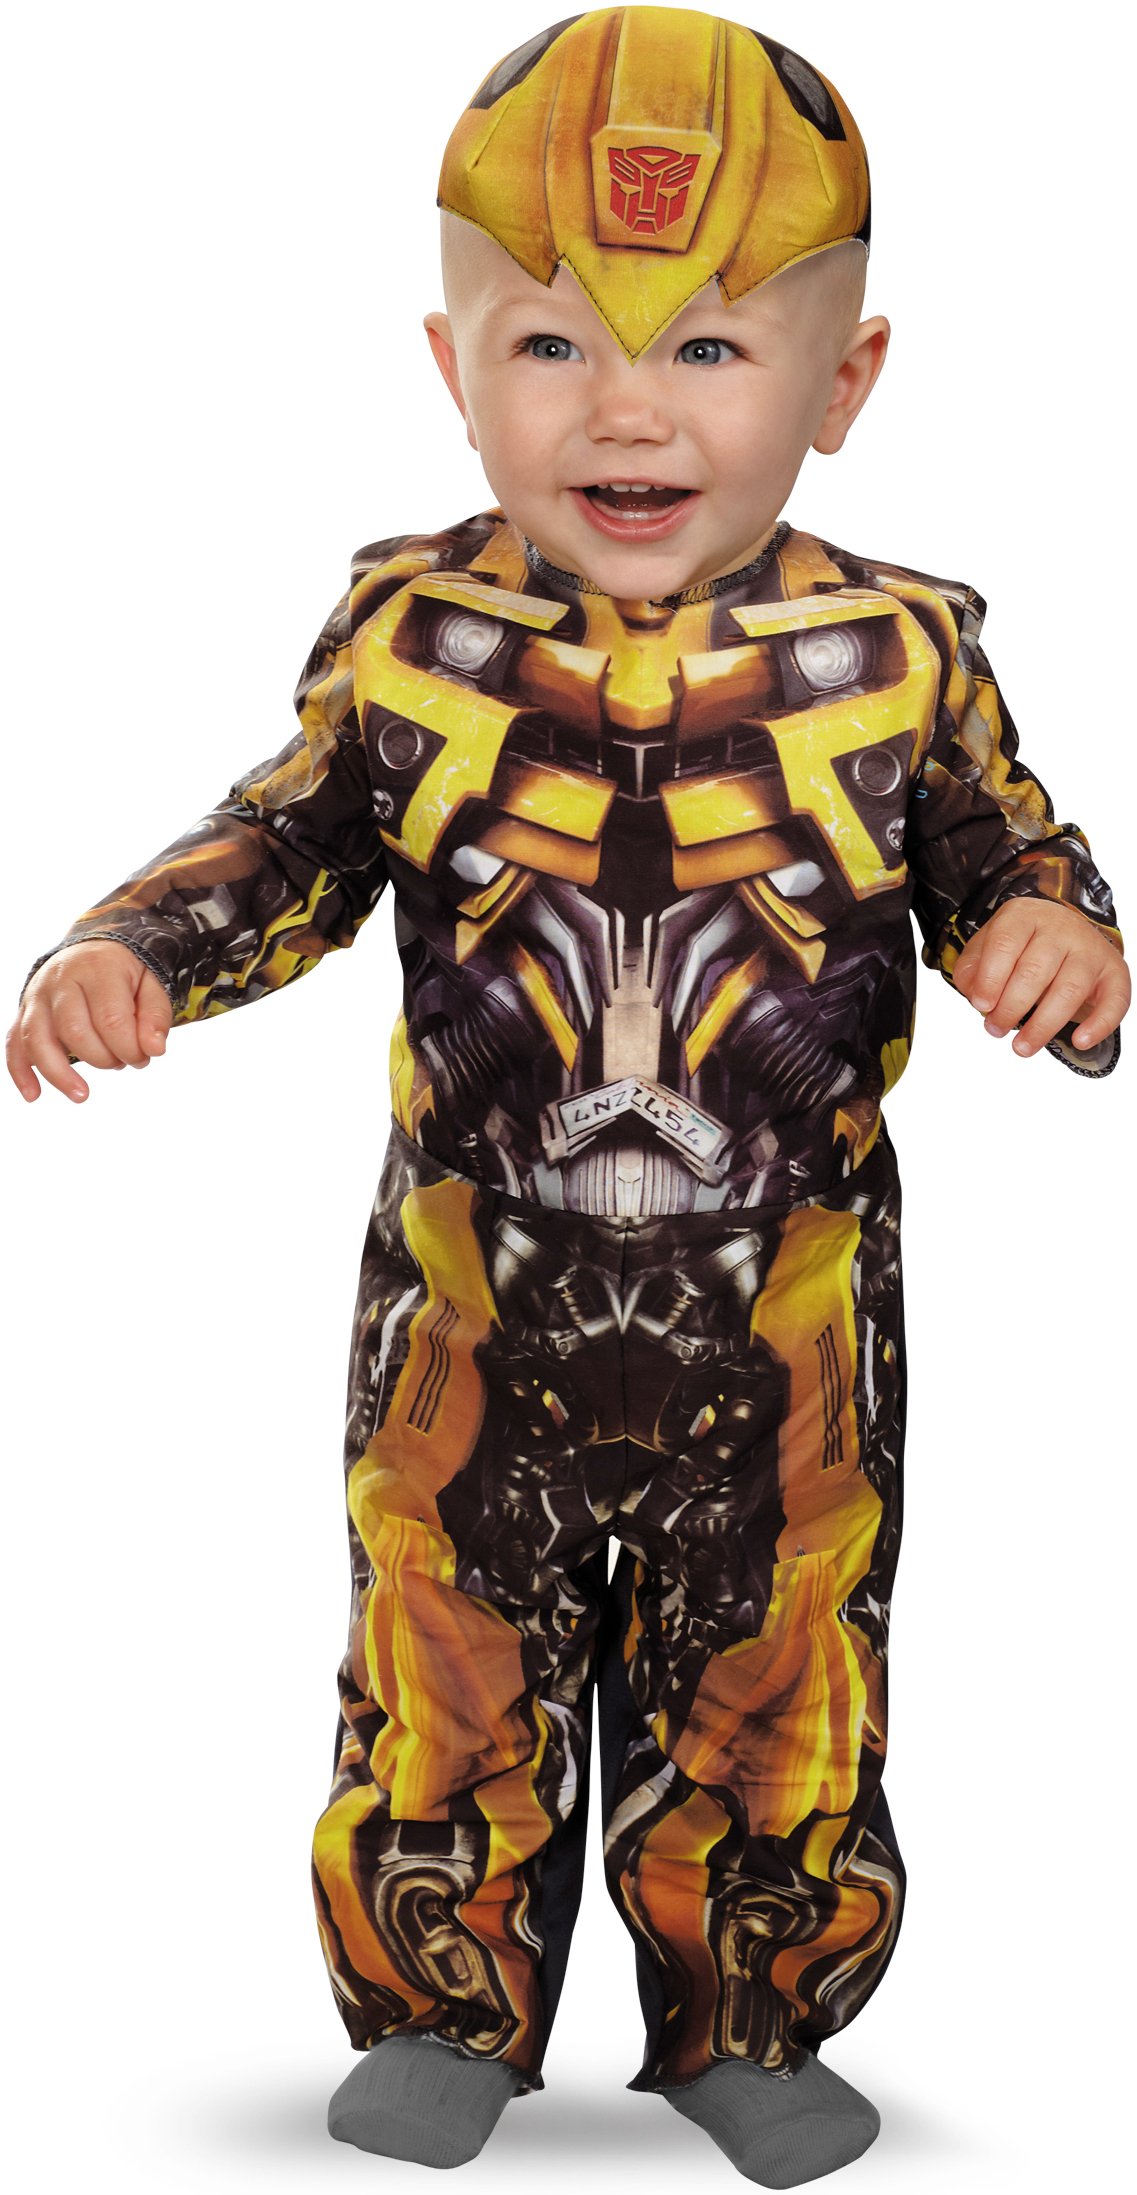 Transformers 3 Dark of the Moon Movie - Bumblebee Infant Costume